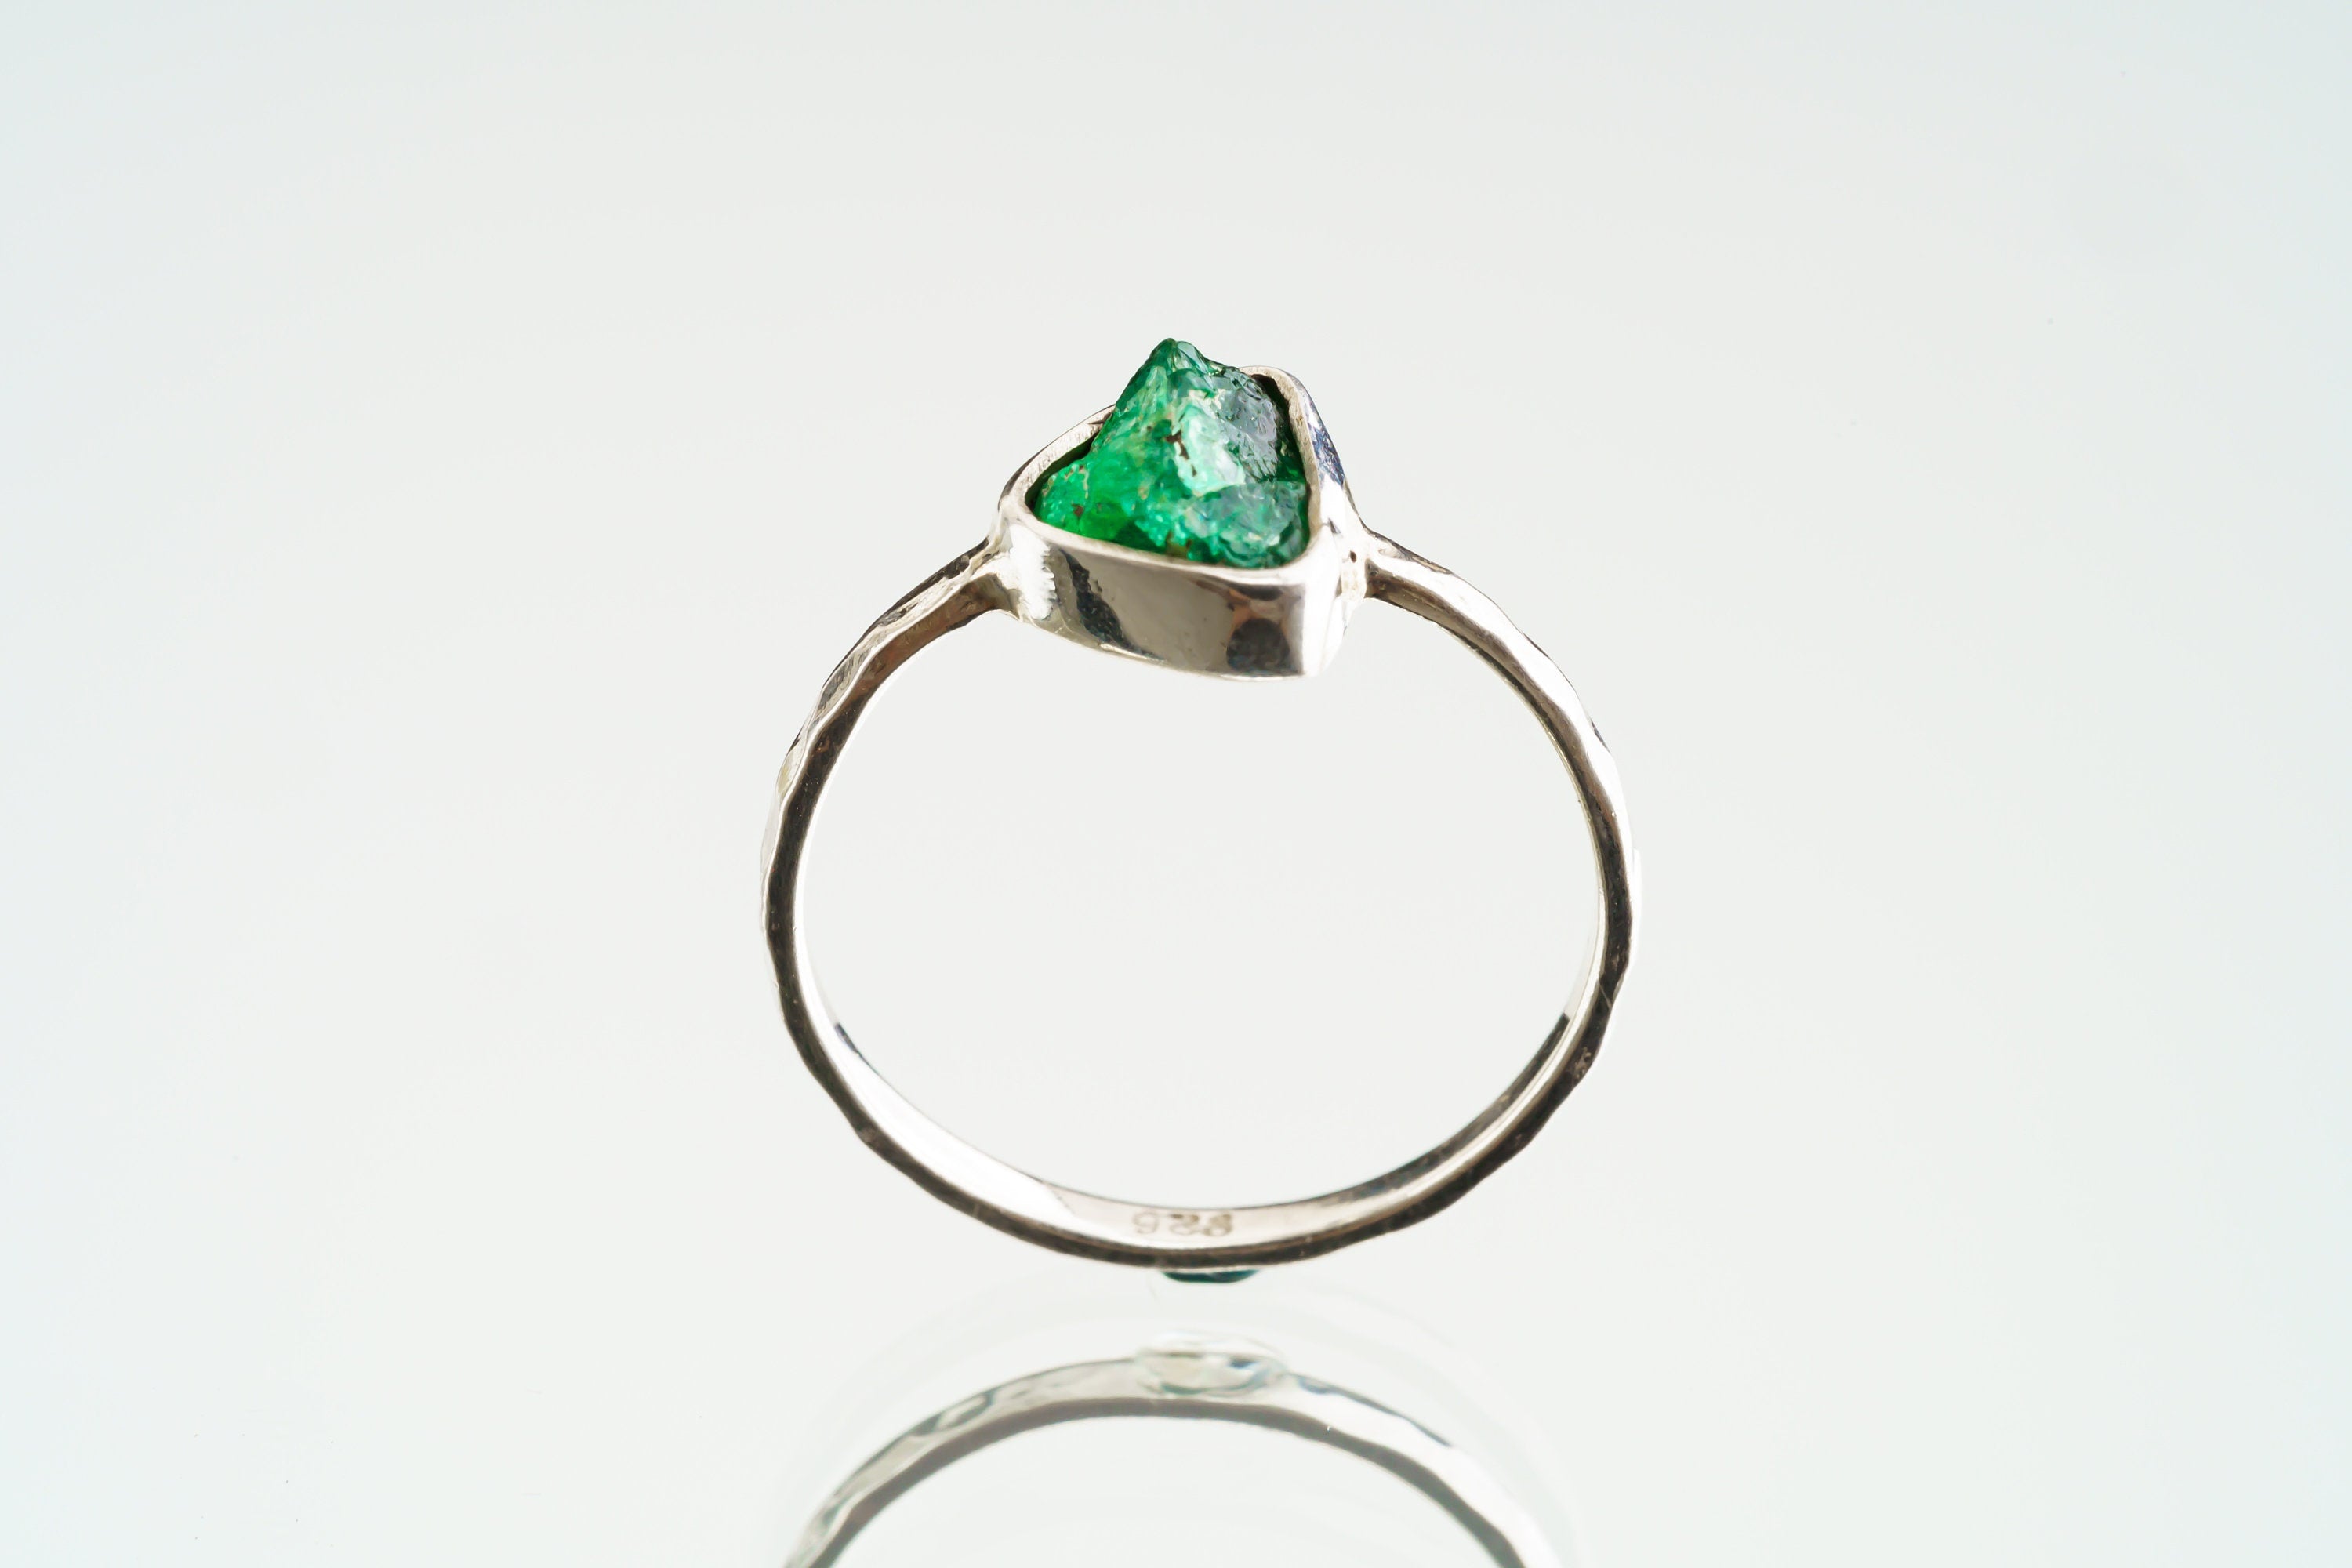 Gemmy Australian Fossicked rough Emerald - Stack Crystal Ring - Size 5 1/2 US - 925 Sterling Silver - Thin Band Hammer Textured